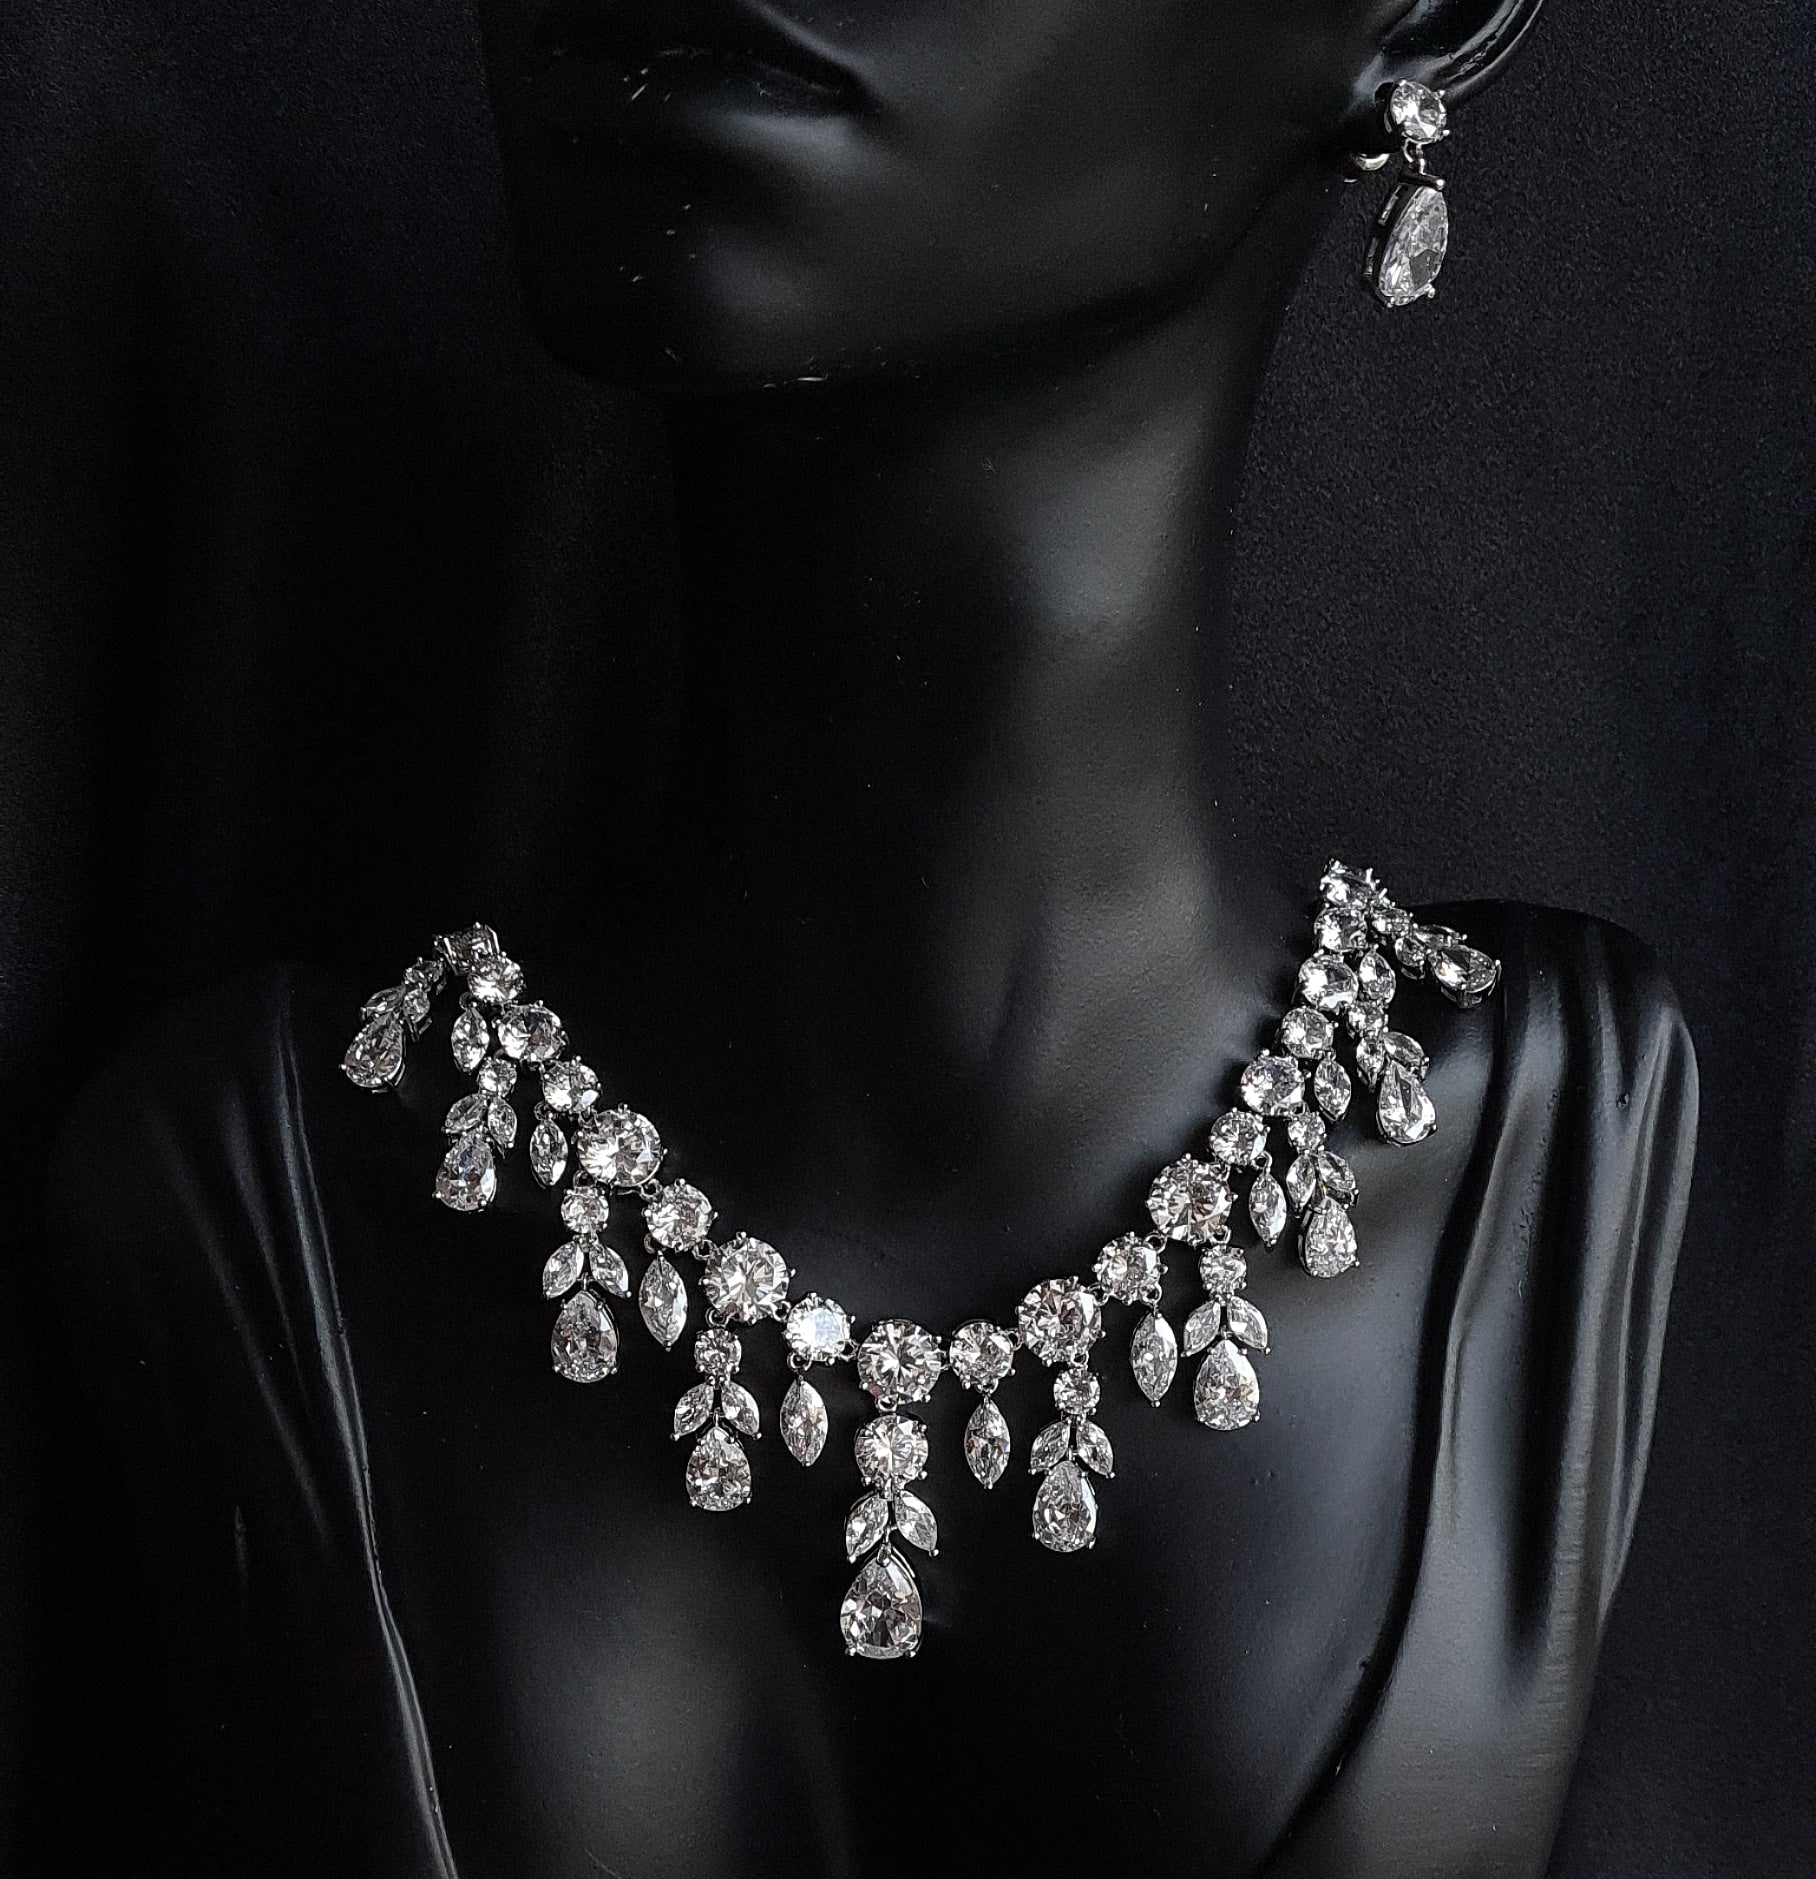 Image of a bridal necklace and earrings set on a mannequin. The necklace is made of cubic zirconia and features a large, round pendant in teardrop shape The earrings are also made of cubic zirconia and have a teardrop shape.